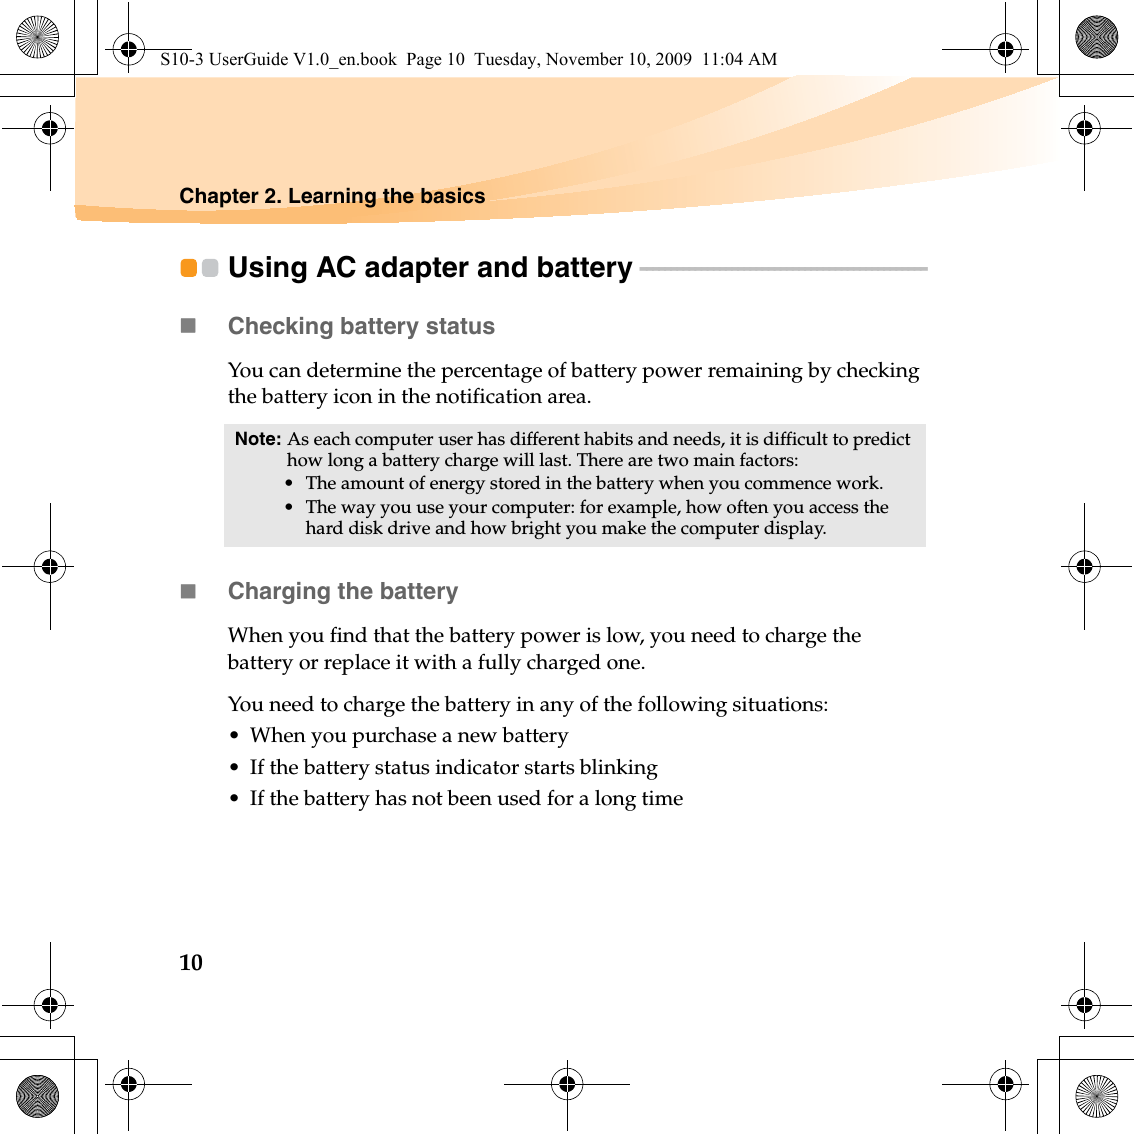 10Chapter 2. Learning the basicsUsing AC adapter and battery - - - - - - - - - - - - - - - - - - - - - - - - - - - - - - - - - - - - - - - - - - - - - - - Checking battery statusYou can determine the percentage of battery power remaining by checking the battery icon in the notification area.Charging the batteryWhen you find that the battery power is low, you need to charge the battery or replace it with a fully charged one.You need to charge the battery in any of the following situations:• When you purchase a new battery• If the battery status indicator starts blinking• If the battery has not been used for a long timeNote: As each computer user has different habits and needs, it is difficult to predict how long a battery charge will last. There are two main factors:• The amount of energy stored in the battery when you commence work.• The way you use your computer: for example, how often you access the hard disk drive and how bright you make the computer display.S10-3 UserGuide V1.0_en.book  Page 10  Tuesday, November 10, 2009  11:04 AM